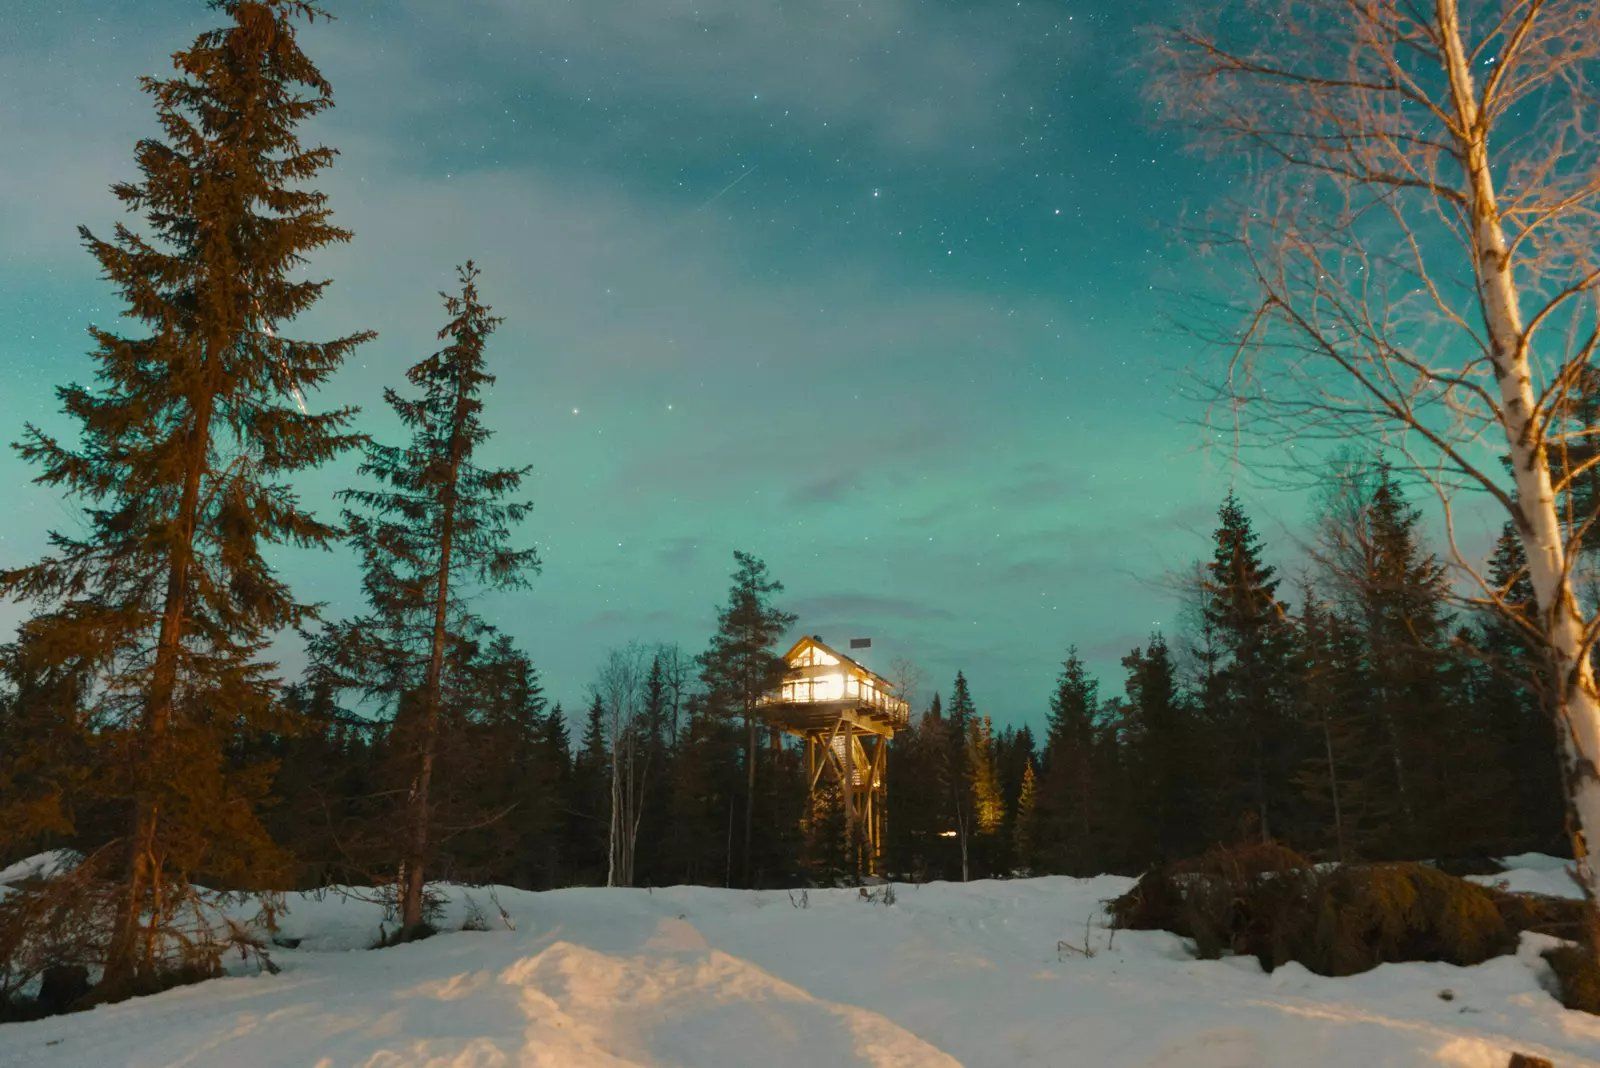 Treehouse under the northern lights in Norway